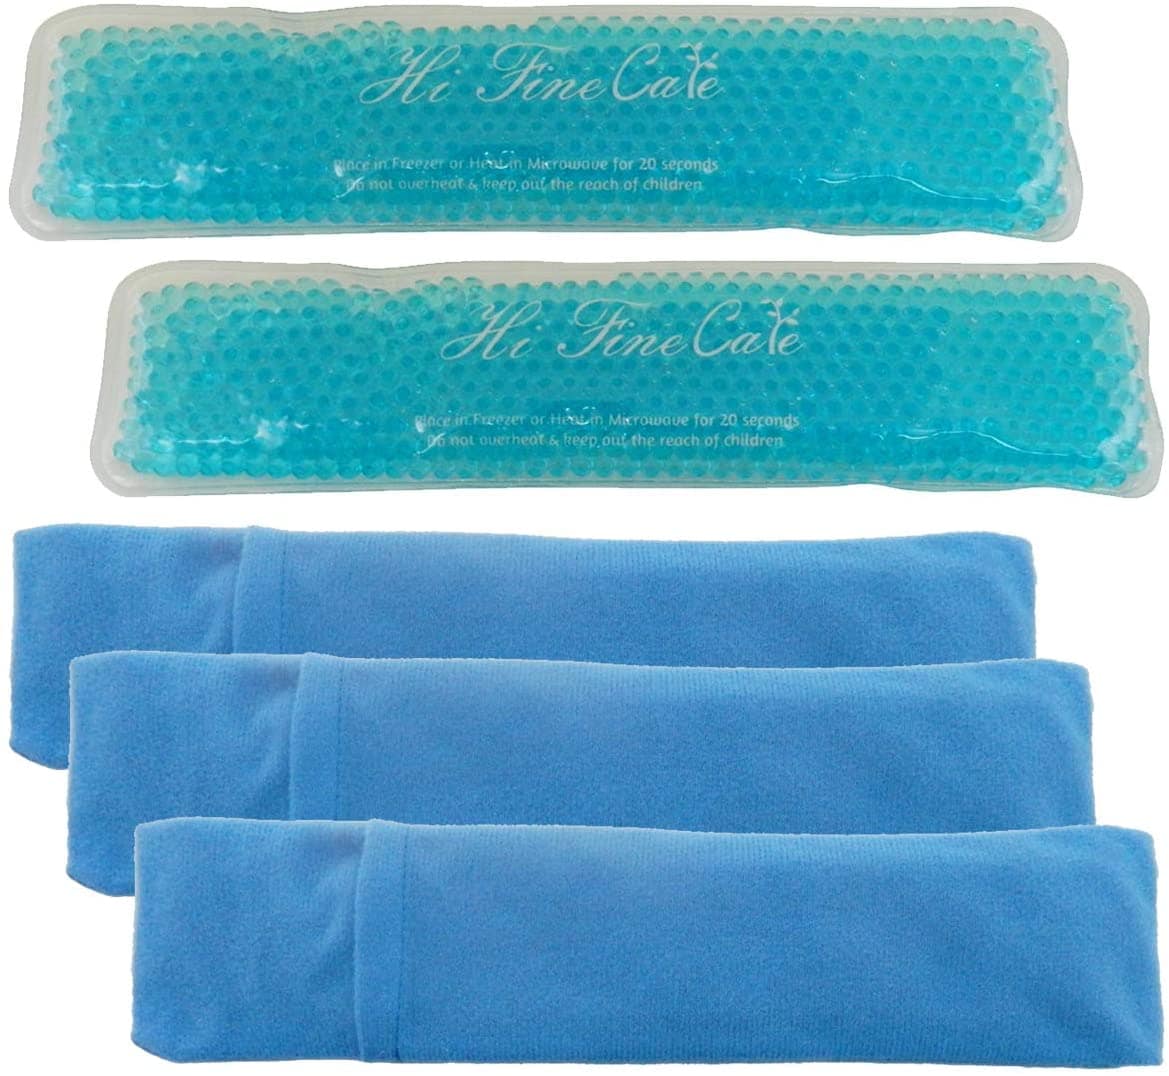 Reusable Perineal Cooling Pads